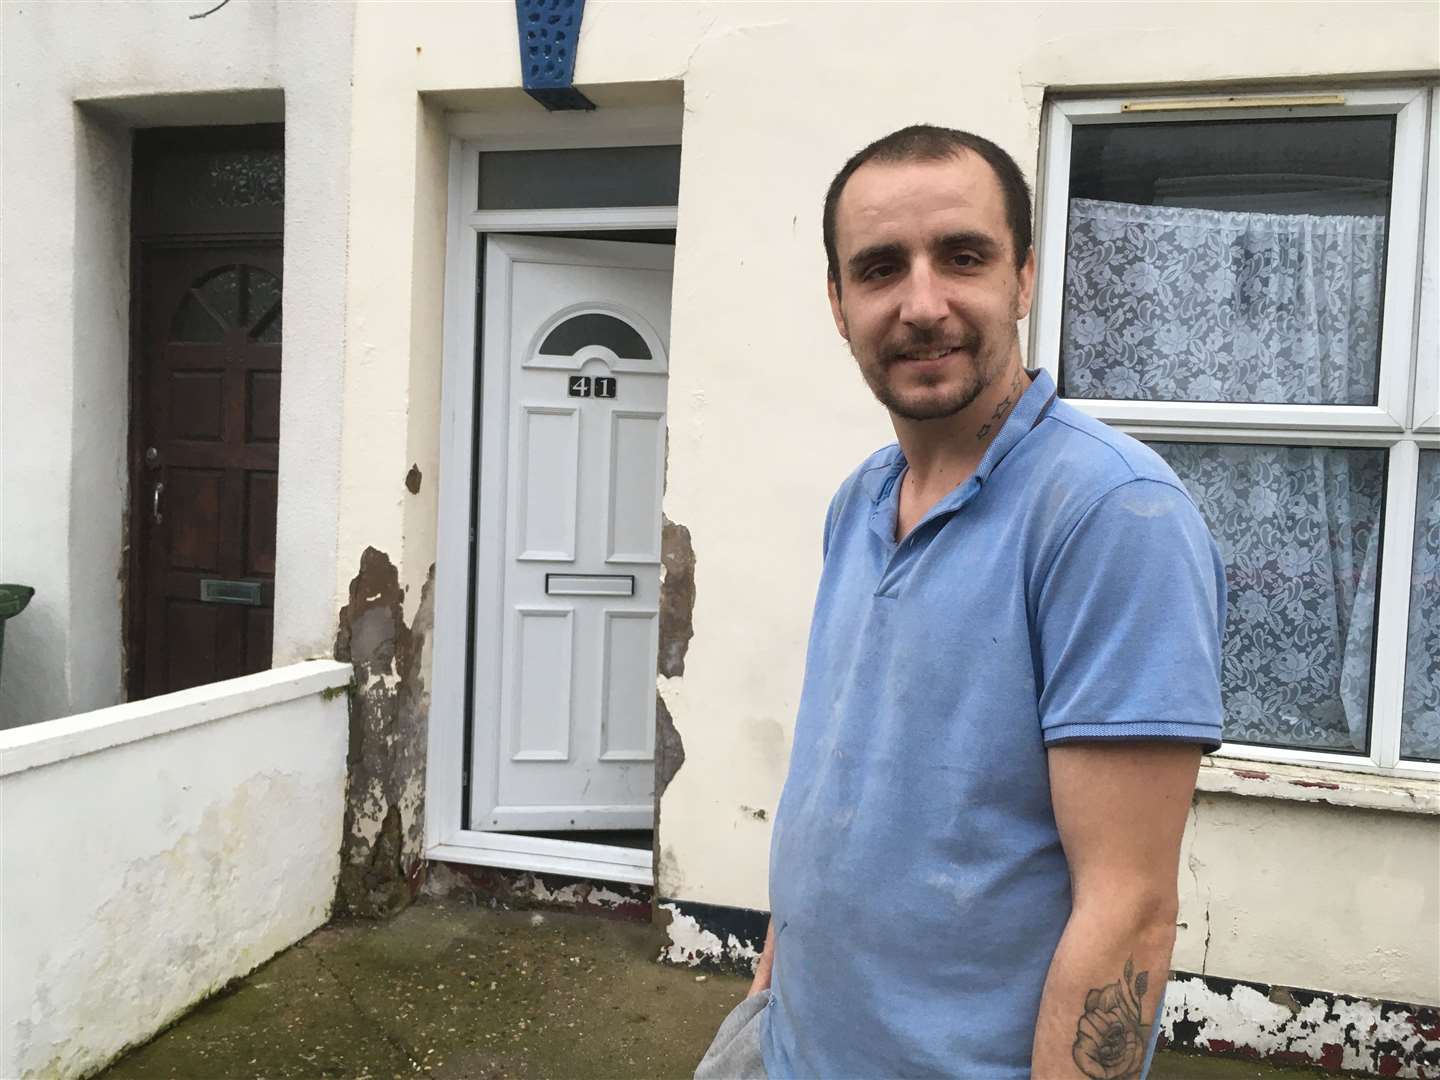 Dad-of-five Andrew Farrar witnessed armed police take away his neighbour in Alma Road, Sheerness, on Saturday